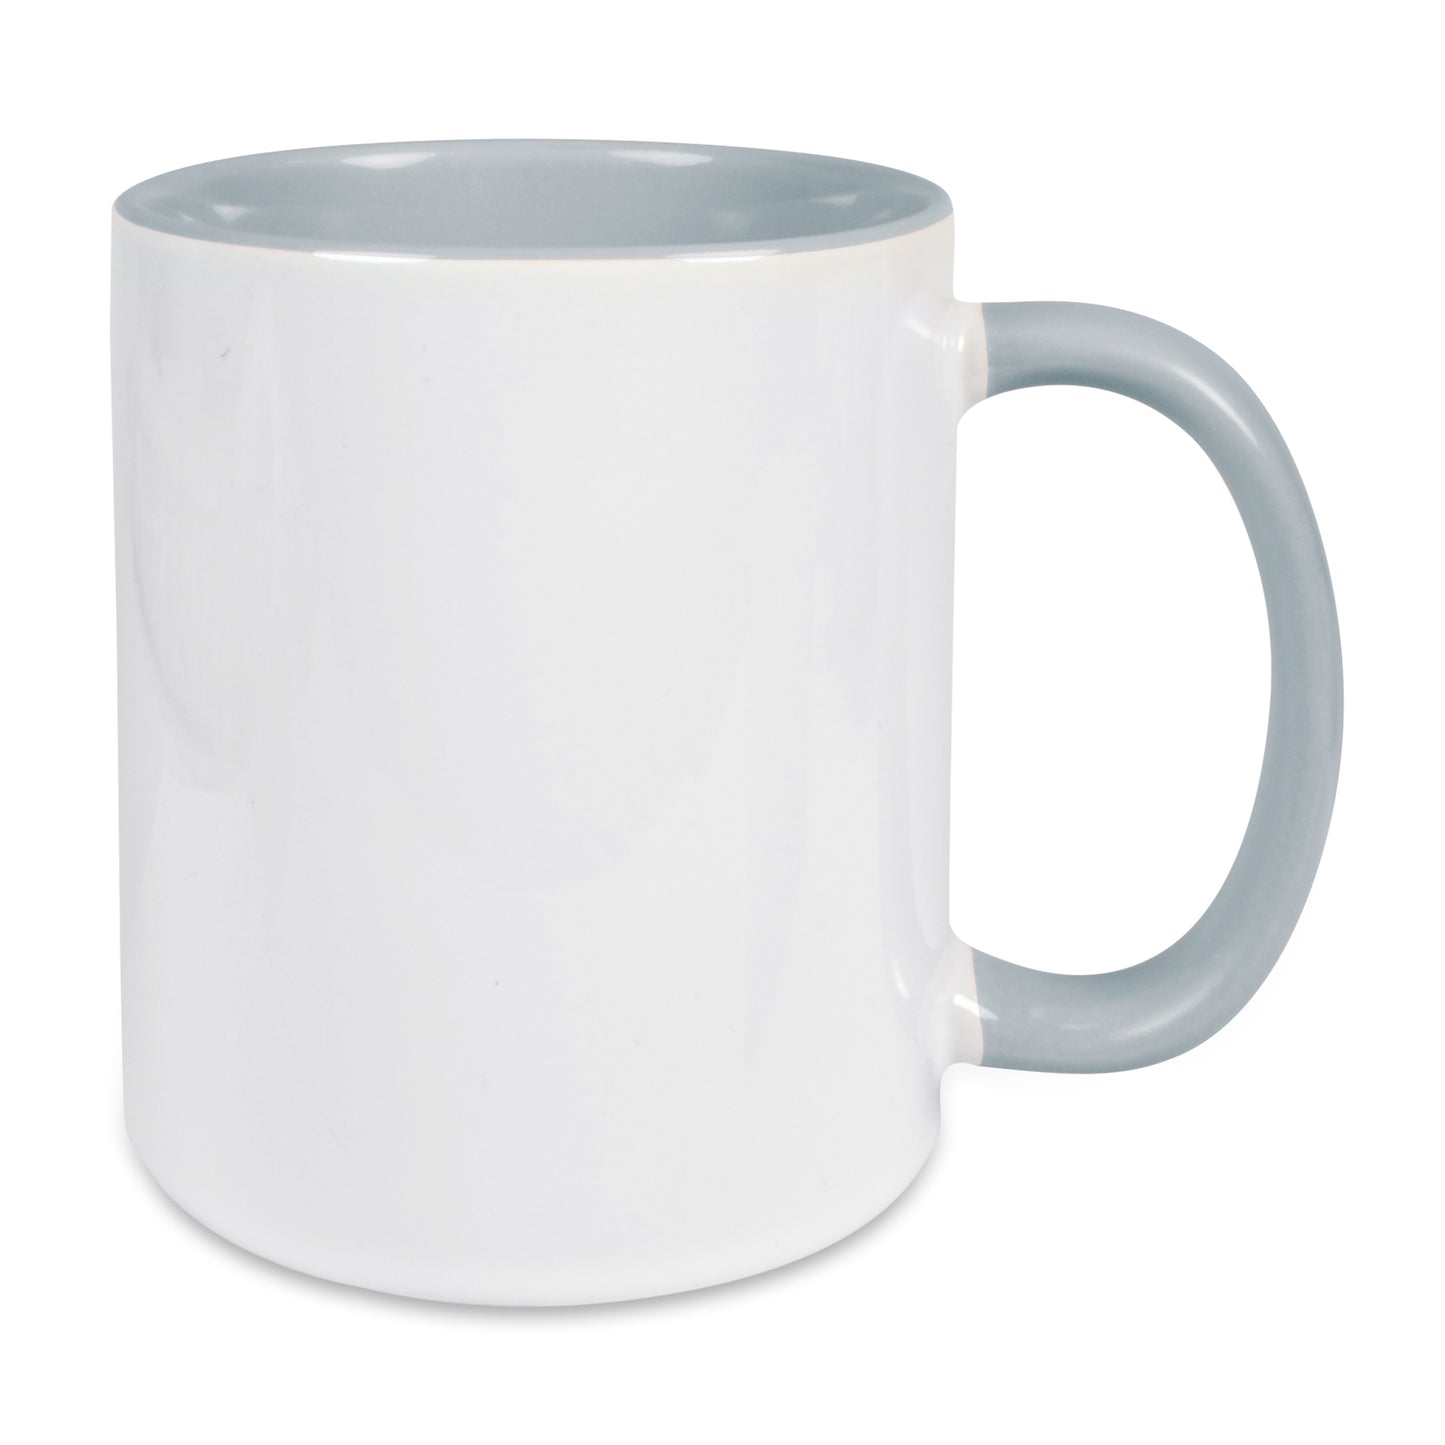 Tasse TWO TONES & HANDLE, Sublistar®-Coating  in 12 Farben TTH-ST-PU